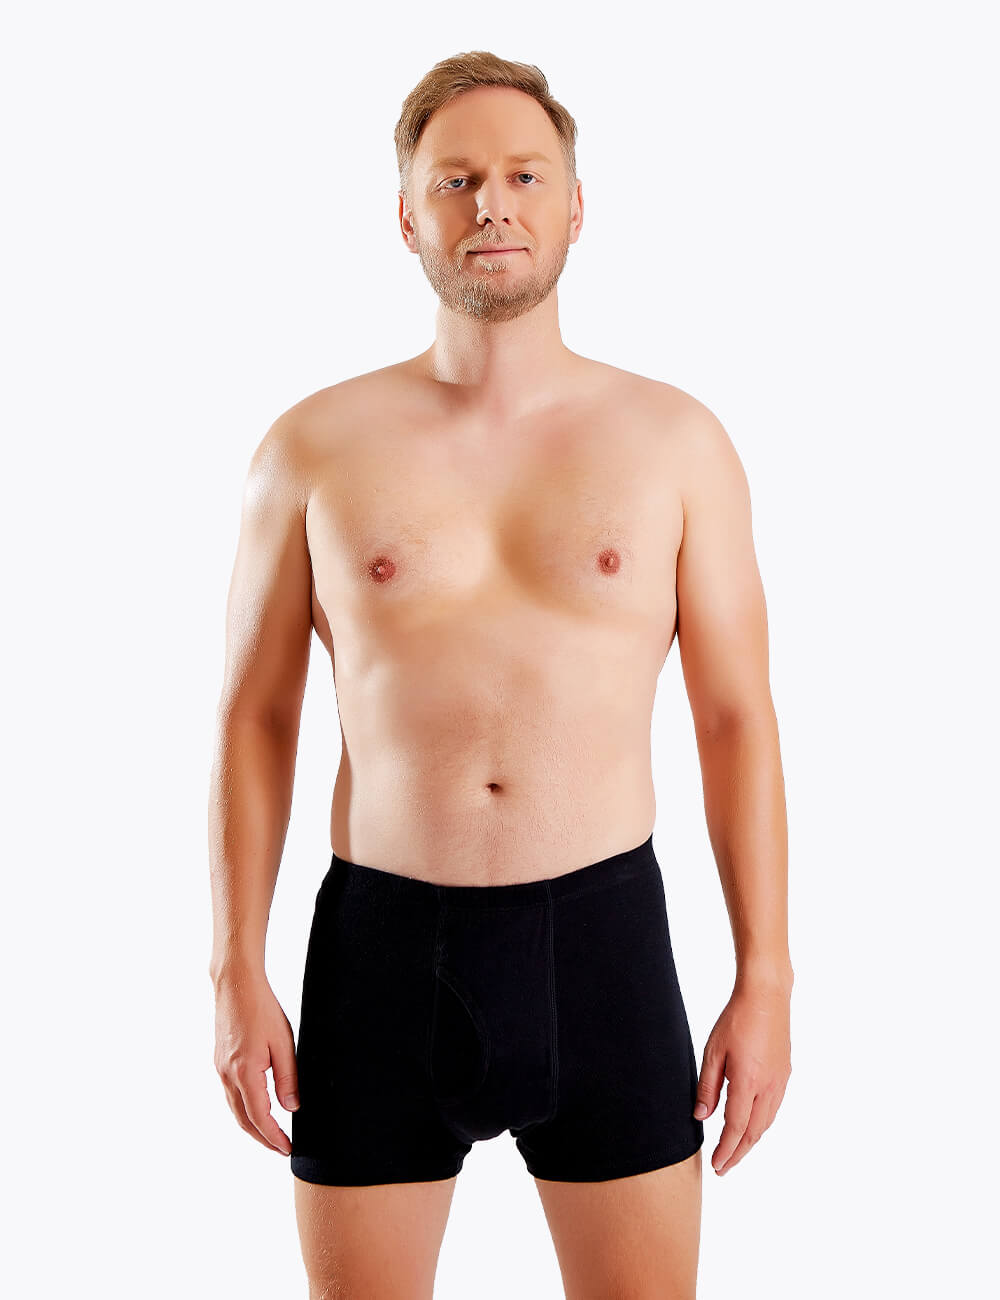 Men's Underwear Size Chart in CM and Inches: No More Guesswork!